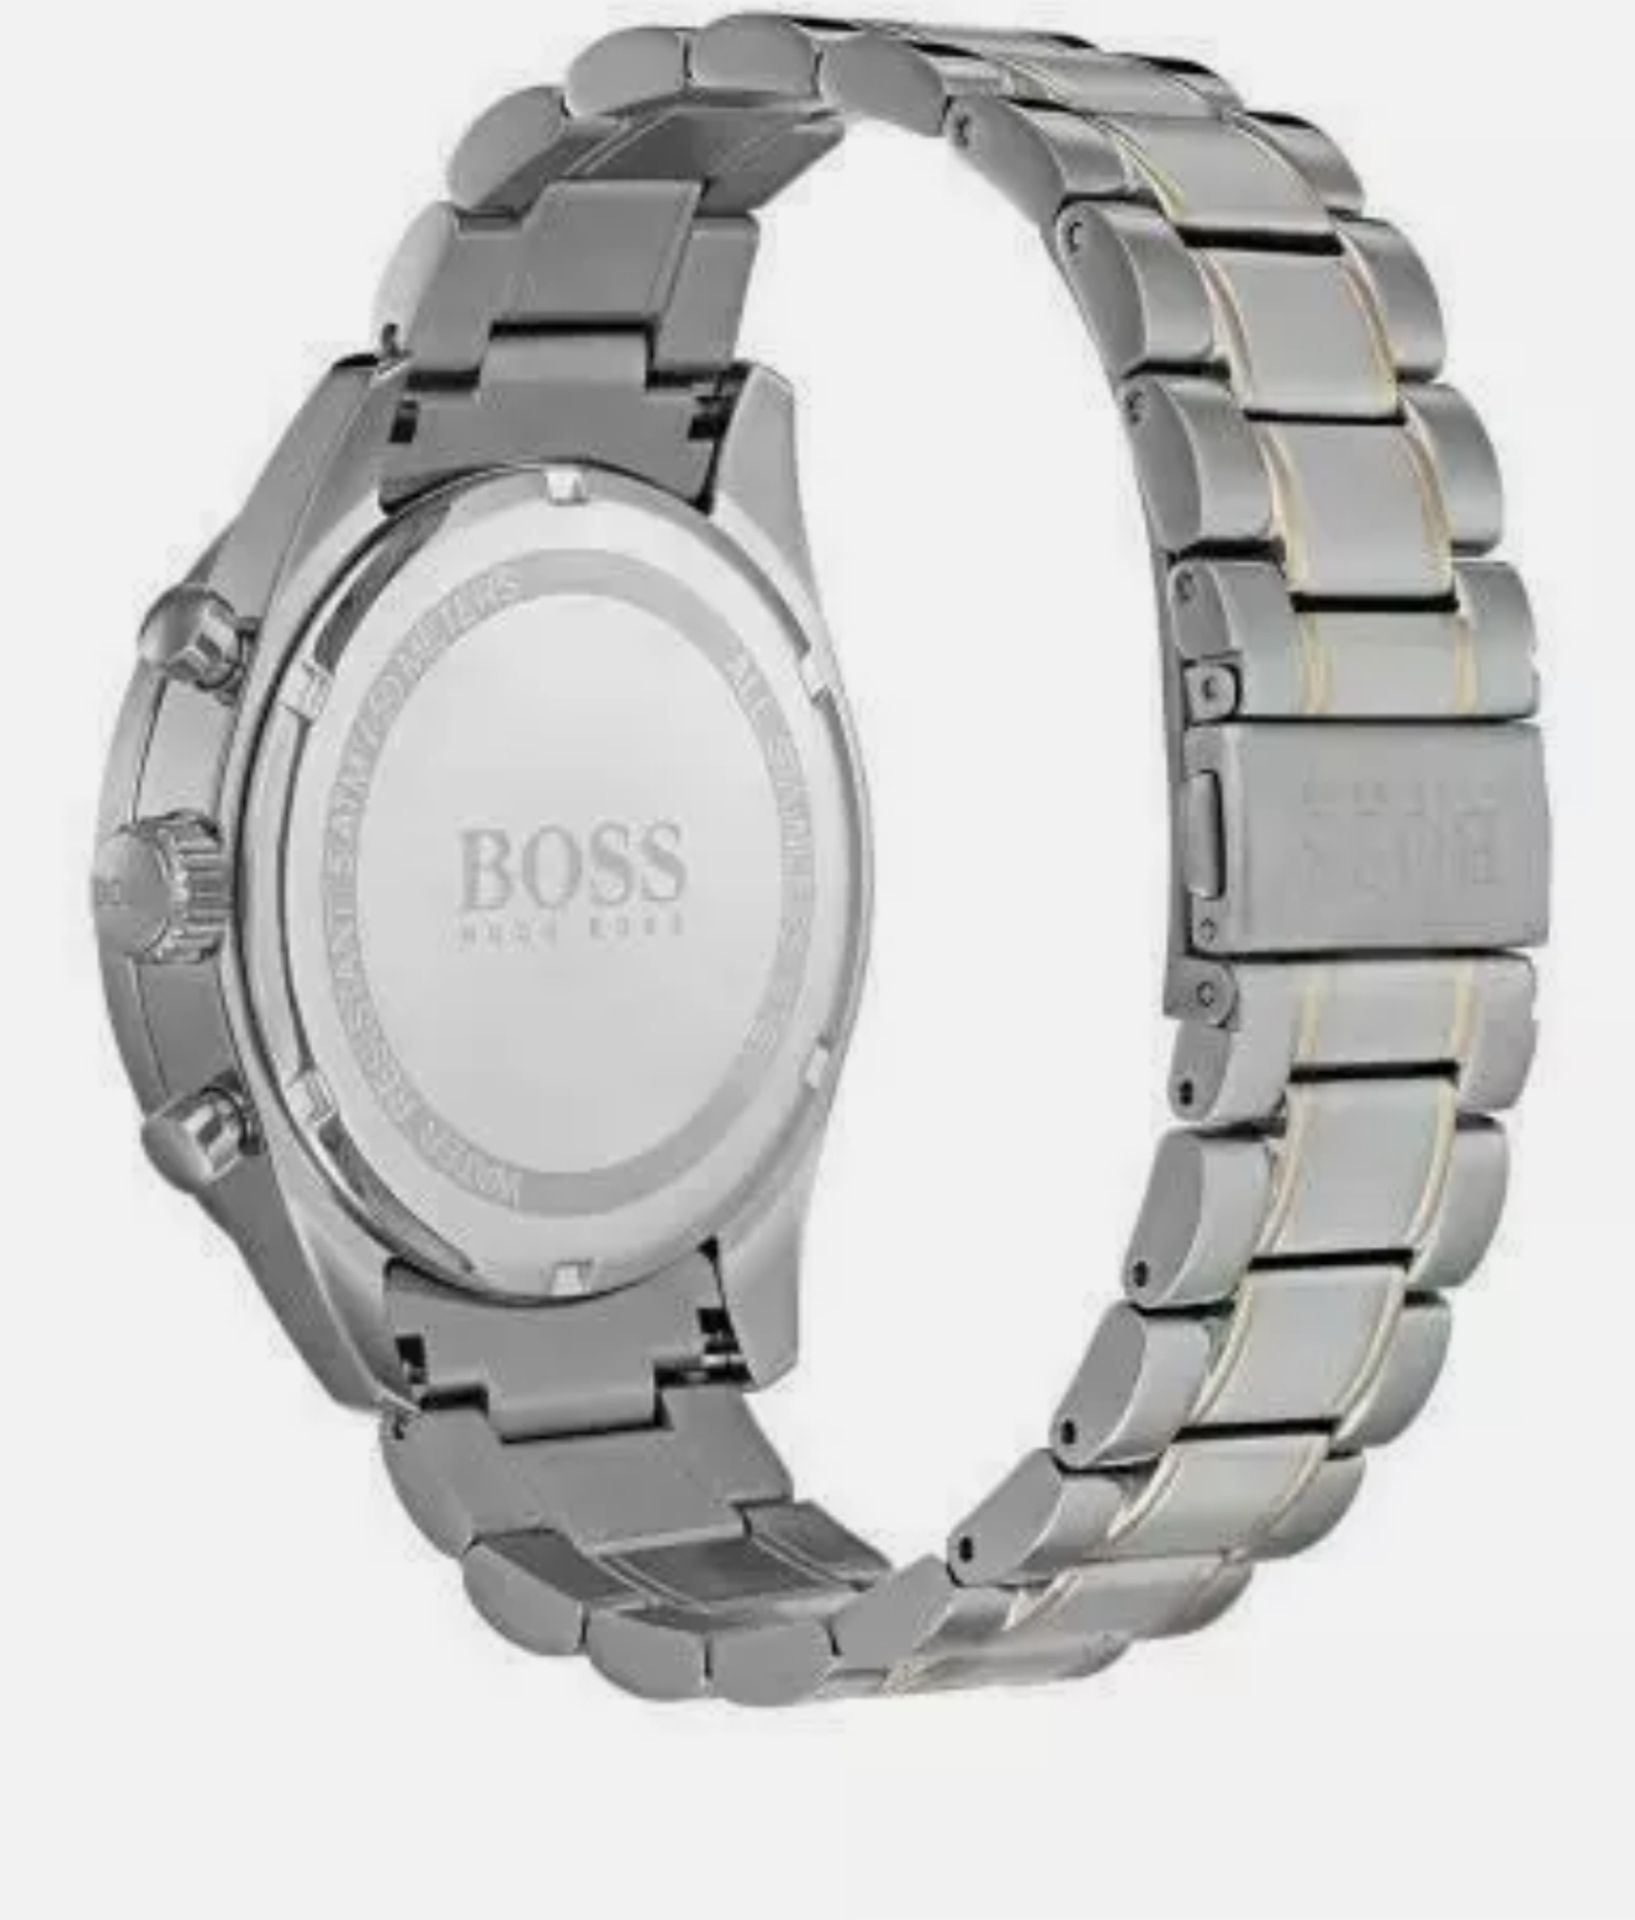 Hugo Boss 1513634 Men's Trophy Two Tone Rose Gold & Silver Chronograph Watch - Image 3 of 7